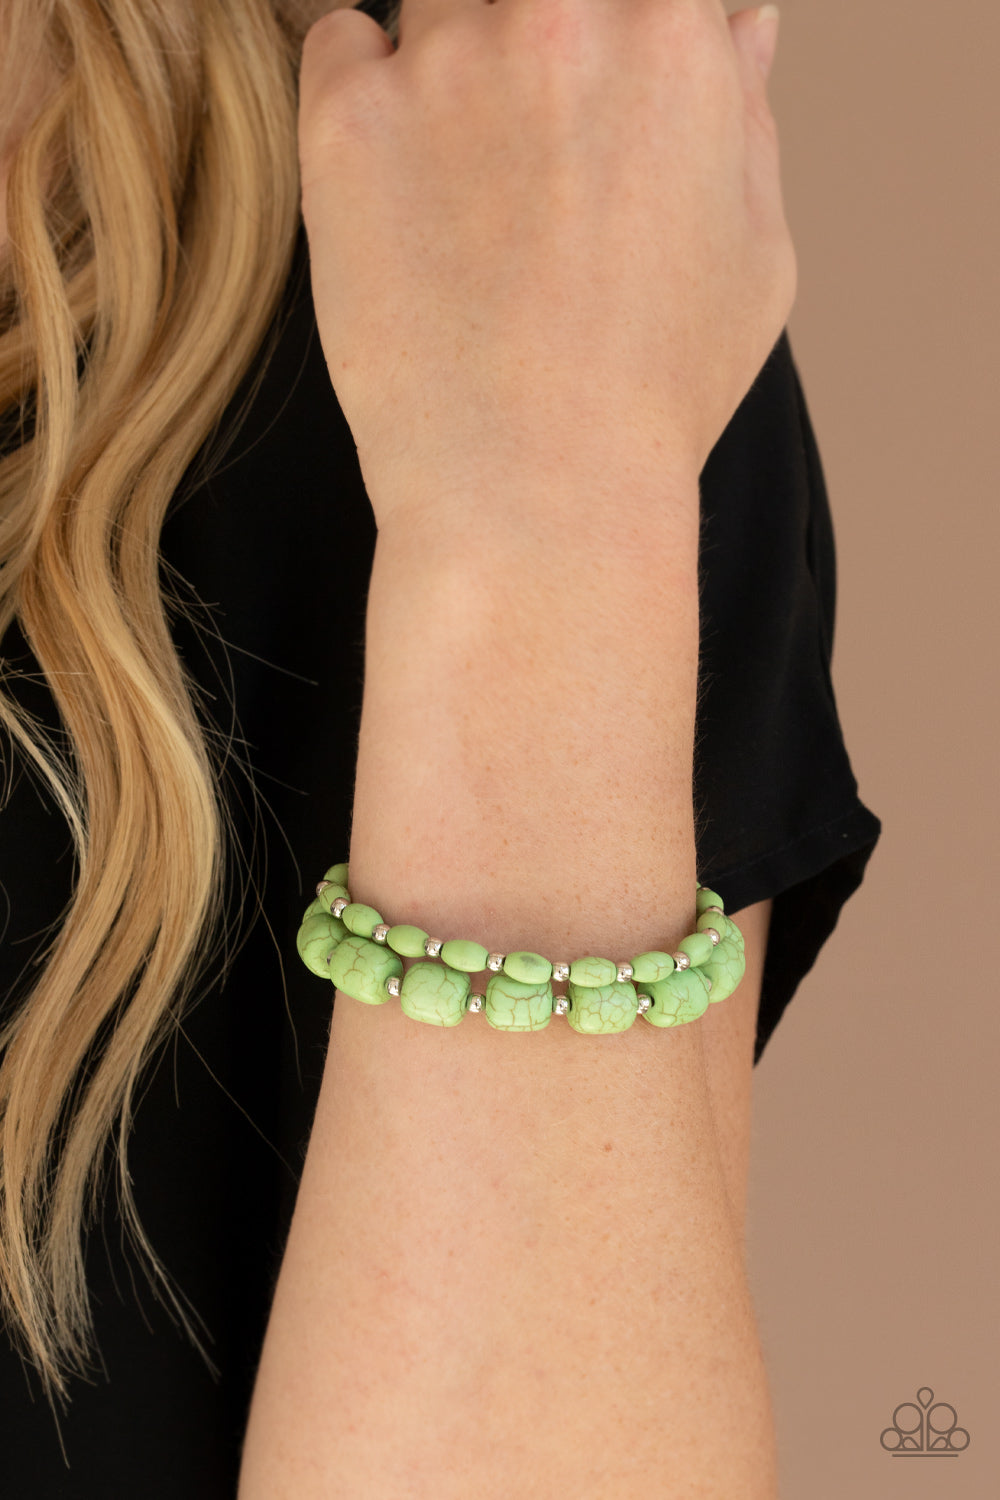 Paparazzi Colorfully Country - Green Bracelet - A Finishing Touch Jewelry